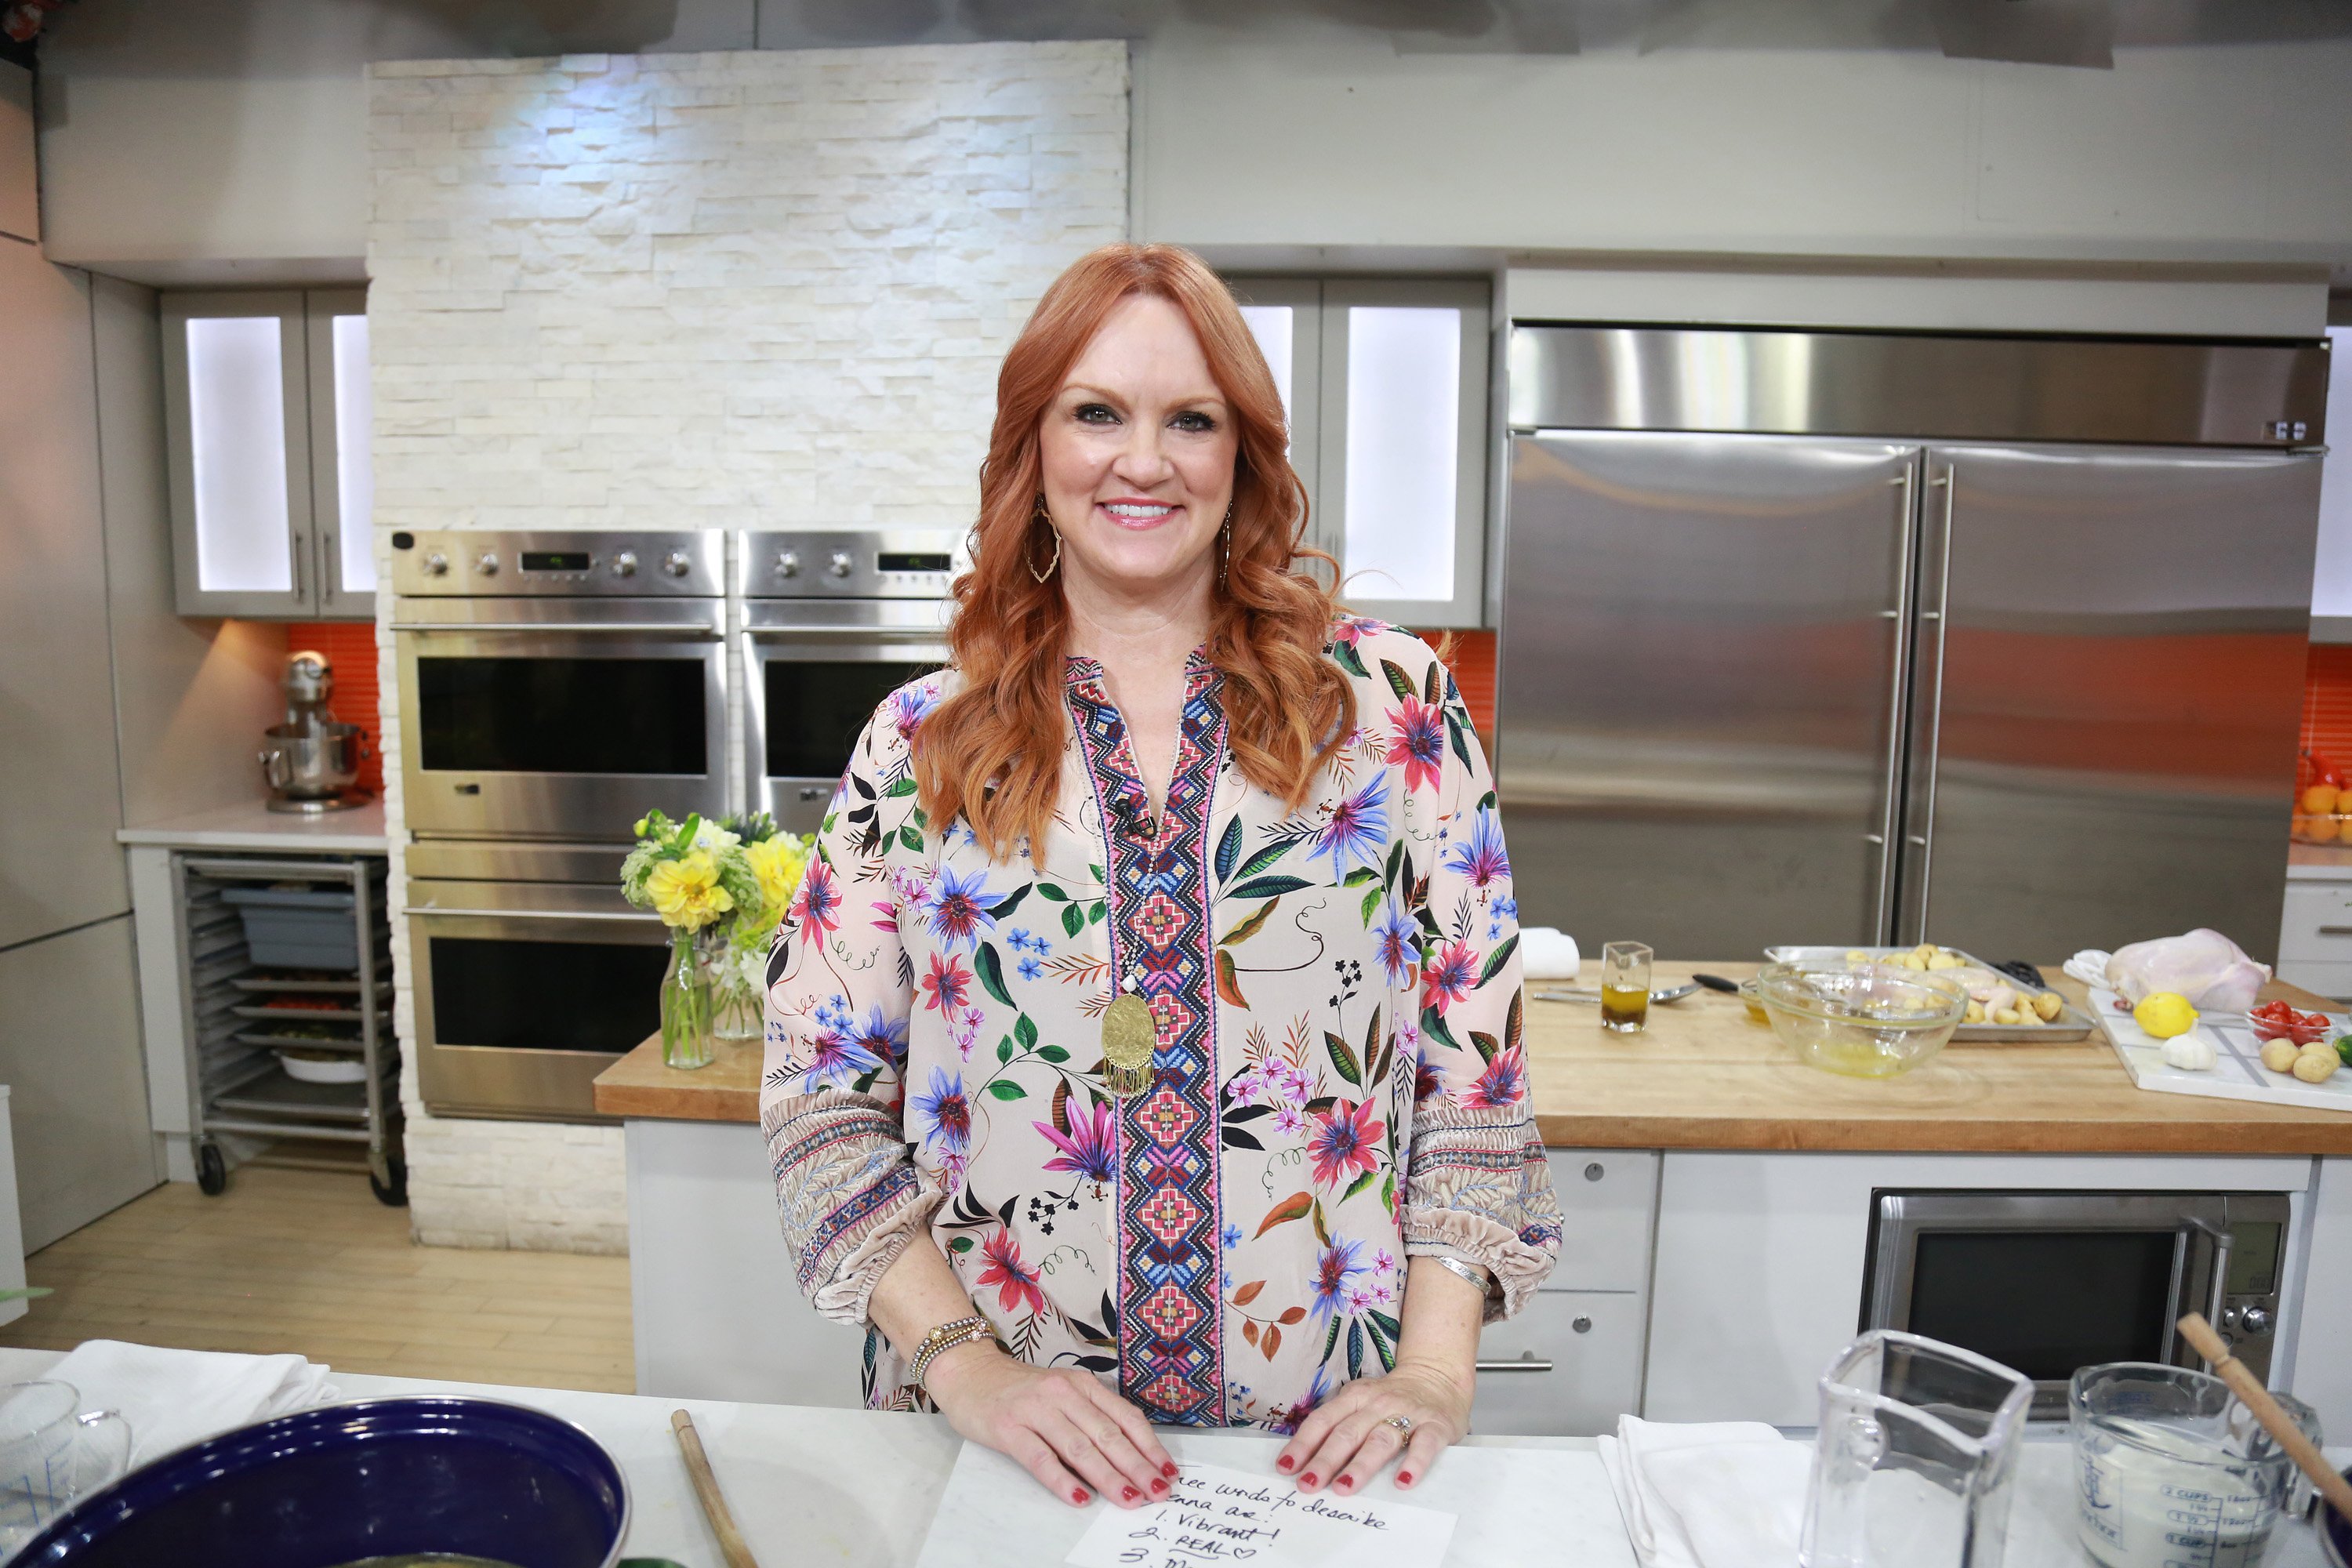 Ree Drummond on the 'Today' show.